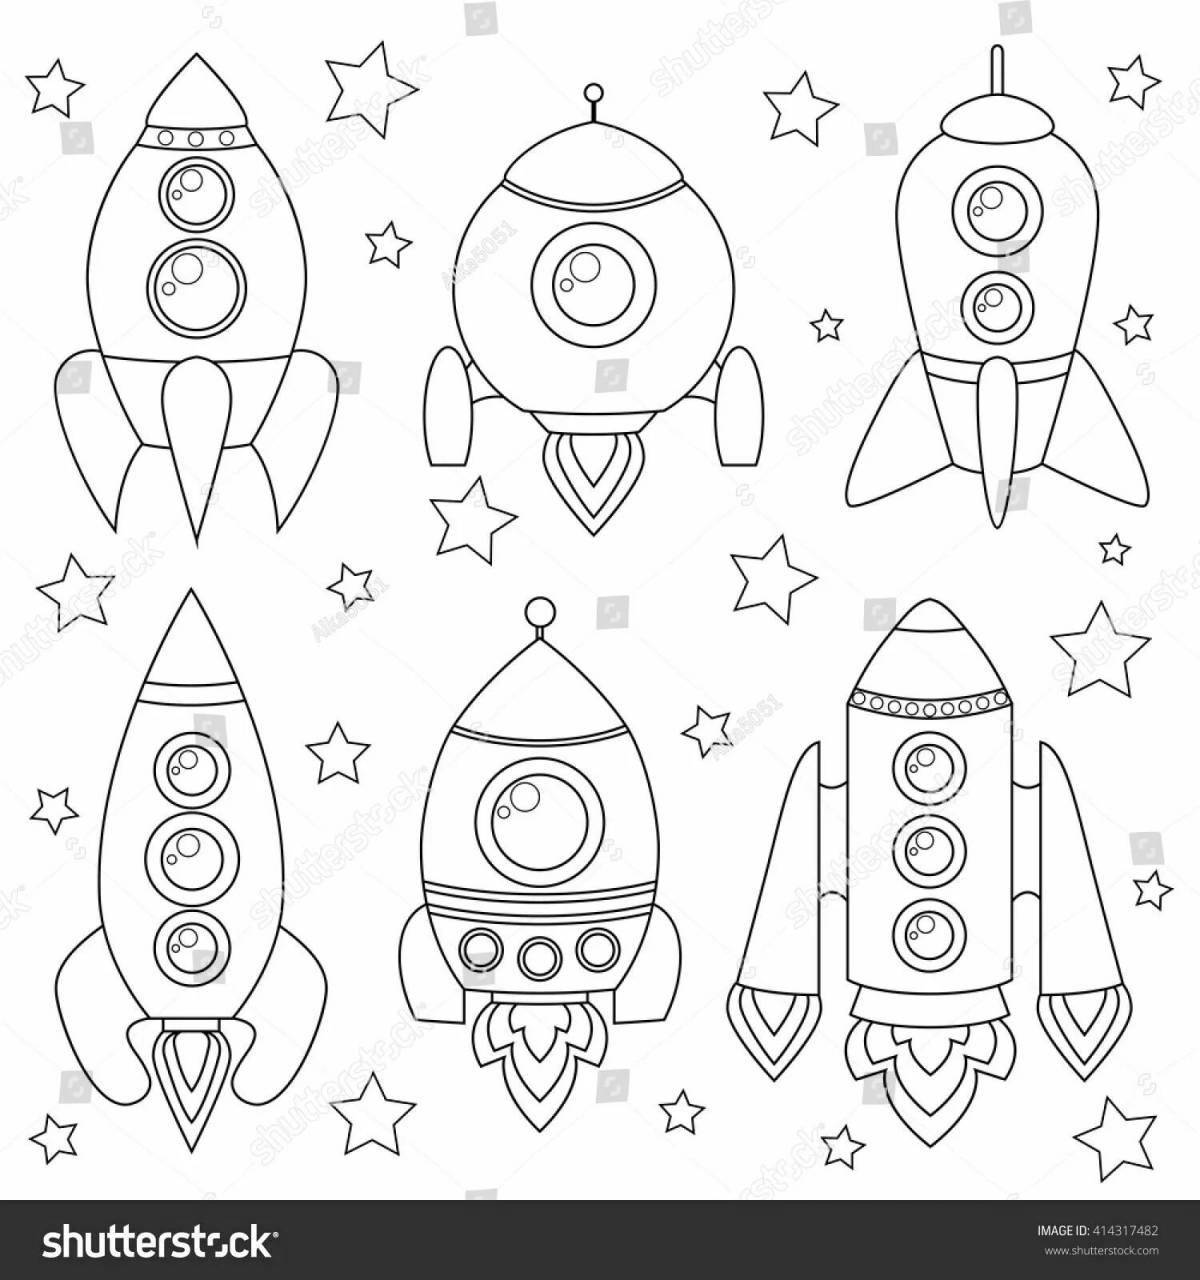 Outstanding rocket coloring book for 4-5 year olds